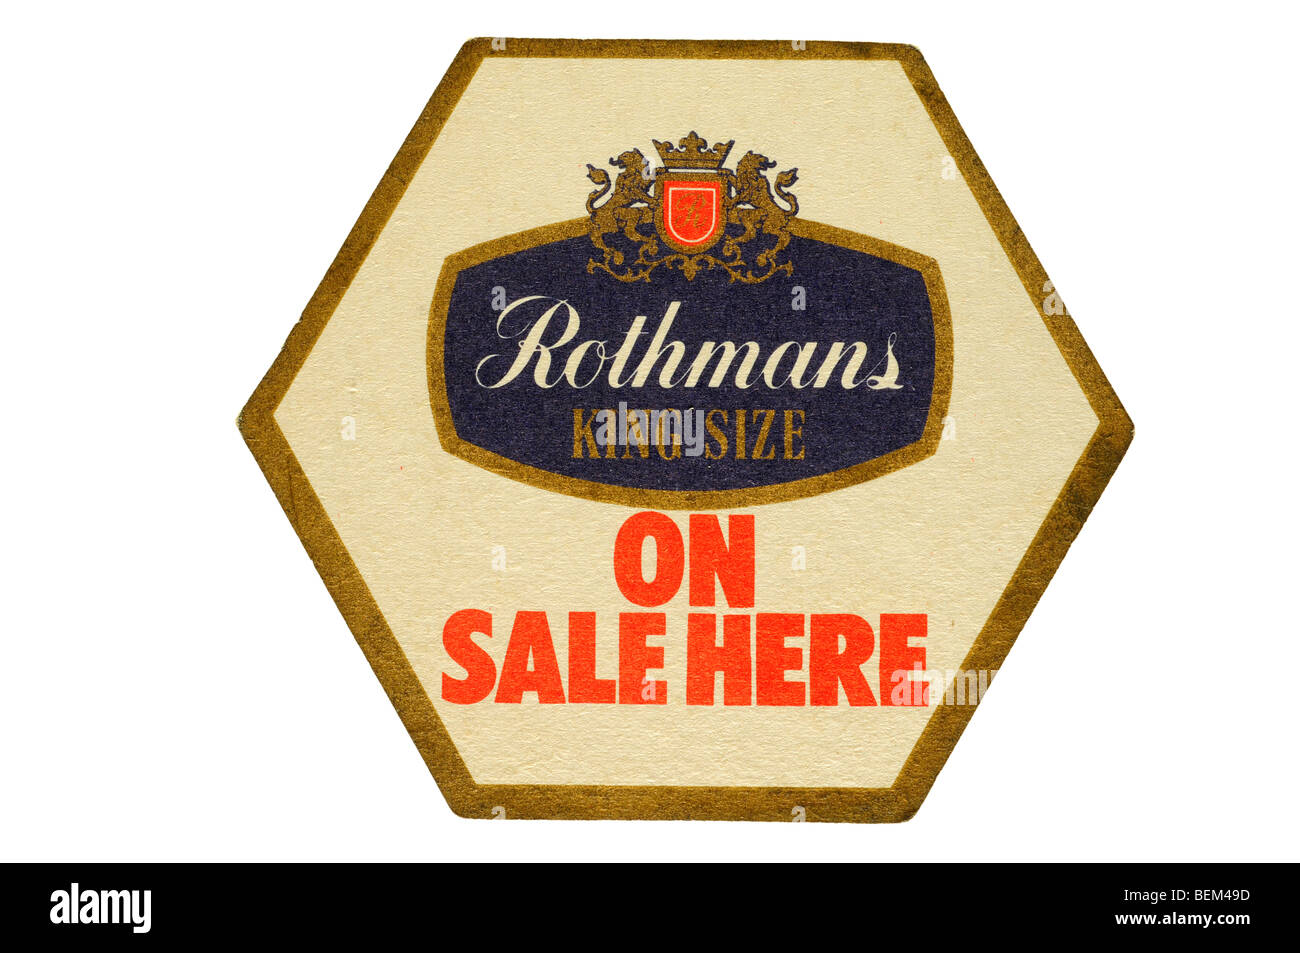 rothmans king size on sale here Stock Photo